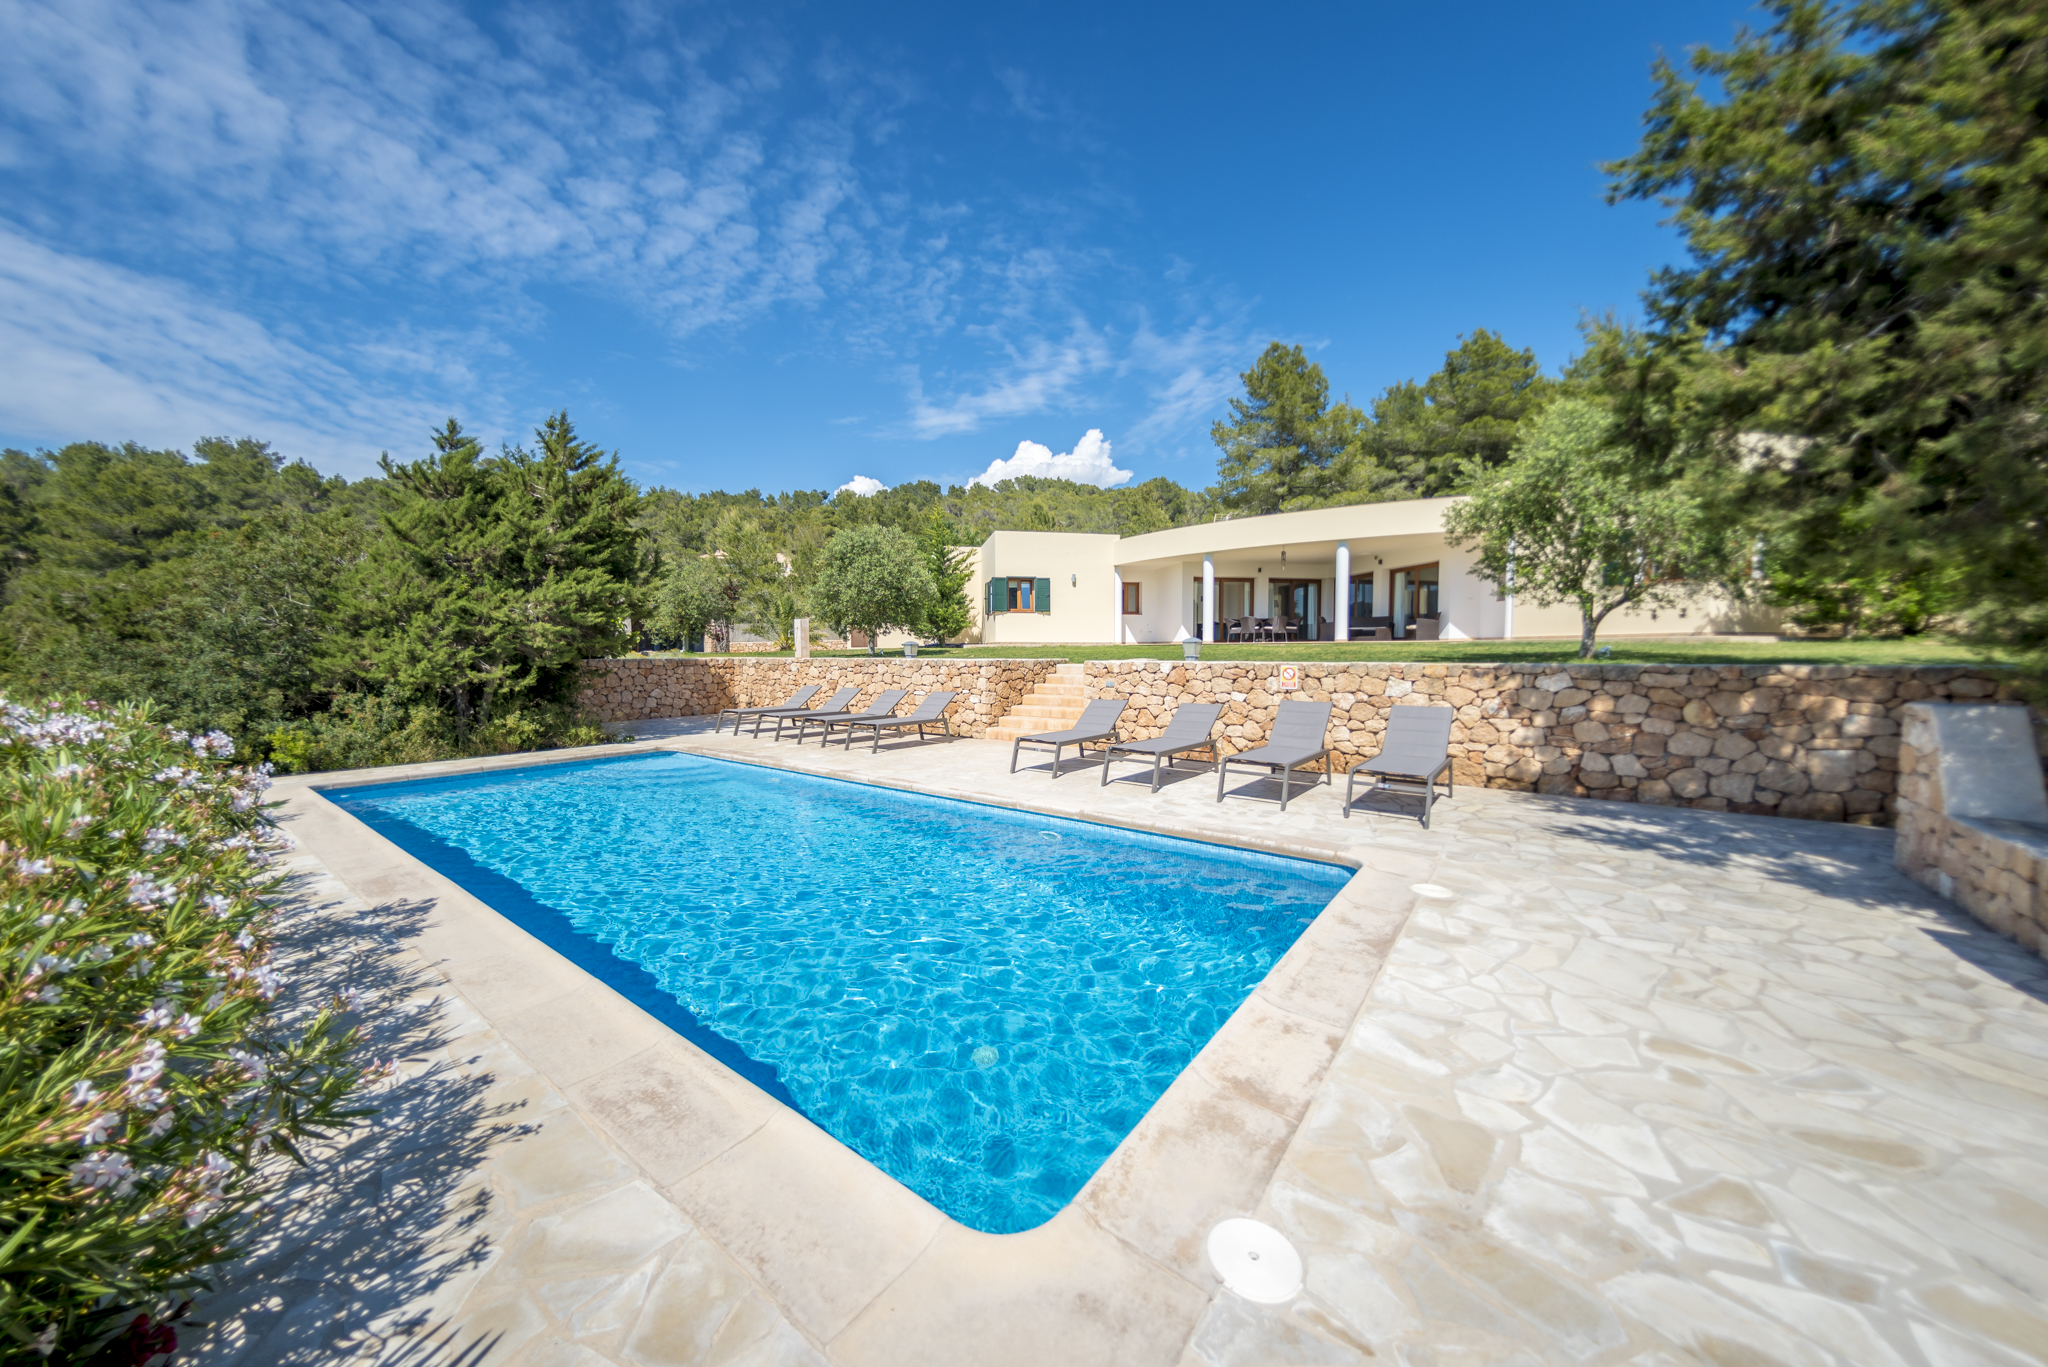 Luxury holidays in Ibiza with Engel & Völkers: Villas up to 30% cheaper